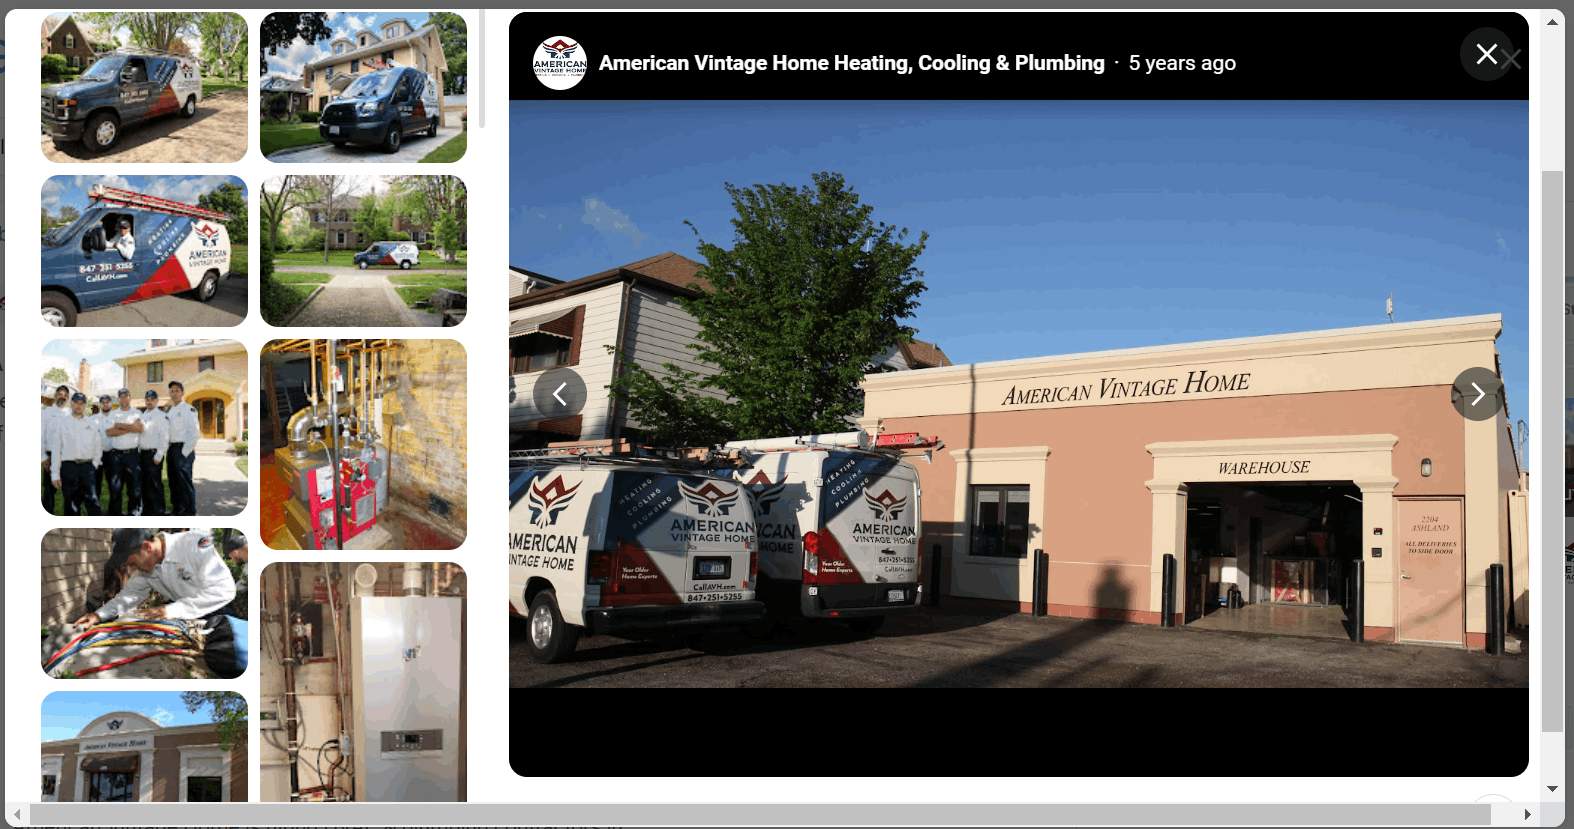 An HVAC company's GBP showing photos of their building and their branded work vans.